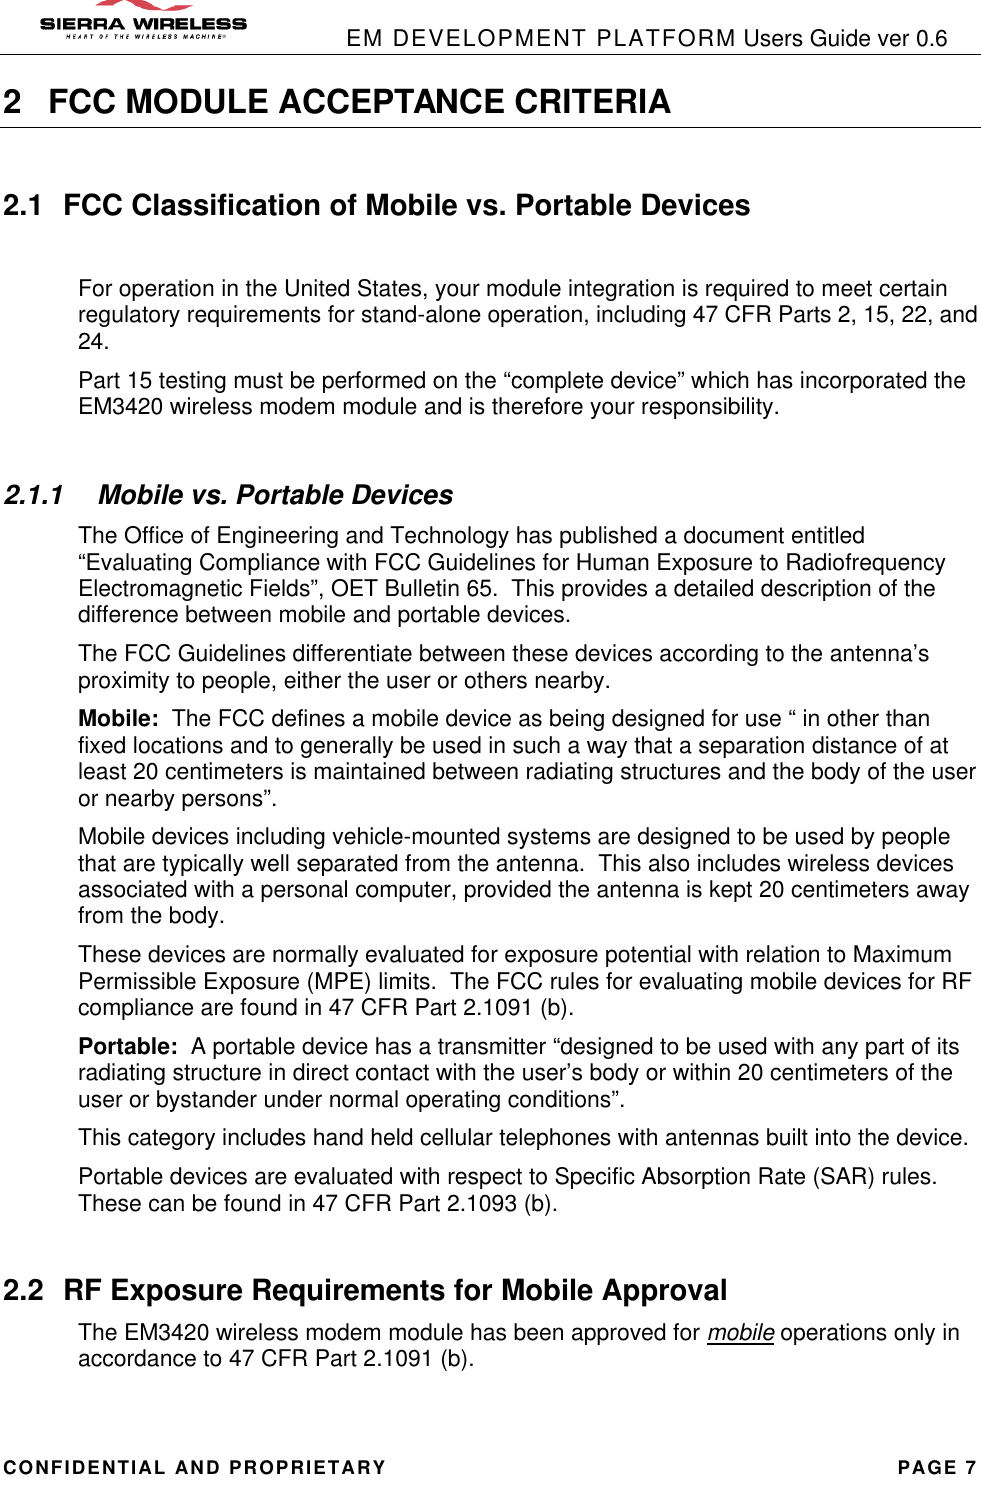            EM DEVELOPMENT PLATFORM Users Guide ver 0.6 CONFIDENTIAL AND PROPRIETARY PAGE 7 2 FCC MODULE ACCEPTANCE CRITERIA  2.1 FCC Classification of Mobile vs. Portable Devices  For operation in the United States, your module integration is required to meet certain regulatory requirements for stand-alone operation, including 47 CFR Parts 2, 15, 22, and 24. Part 15 testing must be performed on the “complete device” which has incorporated the EM3420 wireless modem module and is therefore your responsibility.   2.1.1  Mobile vs. Portable Devices The Office of Engineering and Technology has published a document entitled “Evaluating Compliance with FCC Guidelines for Human Exposure to Radiofrequency Electromagnetic Fields”, OET Bulletin 65.  This provides a detailed description of the difference between mobile and portable devices. The FCC Guidelines differentiate between these devices according to the antenna’s proximity to people, either the user or others nearby. Mobile:  The FCC defines a mobile device as being designed for use “ in other than fixed locations and to generally be used in such a way that a separation distance of at least 20 centimeters is maintained between radiating structures and the body of the user or nearby persons”. Mobile devices including vehicle-mounted systems are designed to be used by people that are typically well separated from the antenna.  This also includes wireless devices associated with a personal computer, provided the antenna is kept 20 centimeters away from the body. These devices are normally evaluated for exposure potential with relation to Maximum Permissible Exposure (MPE) limits.  The FCC rules for evaluating mobile devices for RF compliance are found in 47 CFR Part 2.1091 (b). Portable:  A portable device has a transmitter “designed to be used with any part of its radiating structure in direct contact with the user’s body or within 20 centimeters of the user or bystander under normal operating conditions”. This category includes hand held cellular telephones with antennas built into the device. Portable devices are evaluated with respect to Specific Absorption Rate (SAR) rules.  These can be found in 47 CFR Part 2.1093 (b).  2.2 RF Exposure Requirements for Mobile Approval The EM3420 wireless modem module has been approved for mobile operations only in accordance to 47 CFR Part 2.1091 (b). 